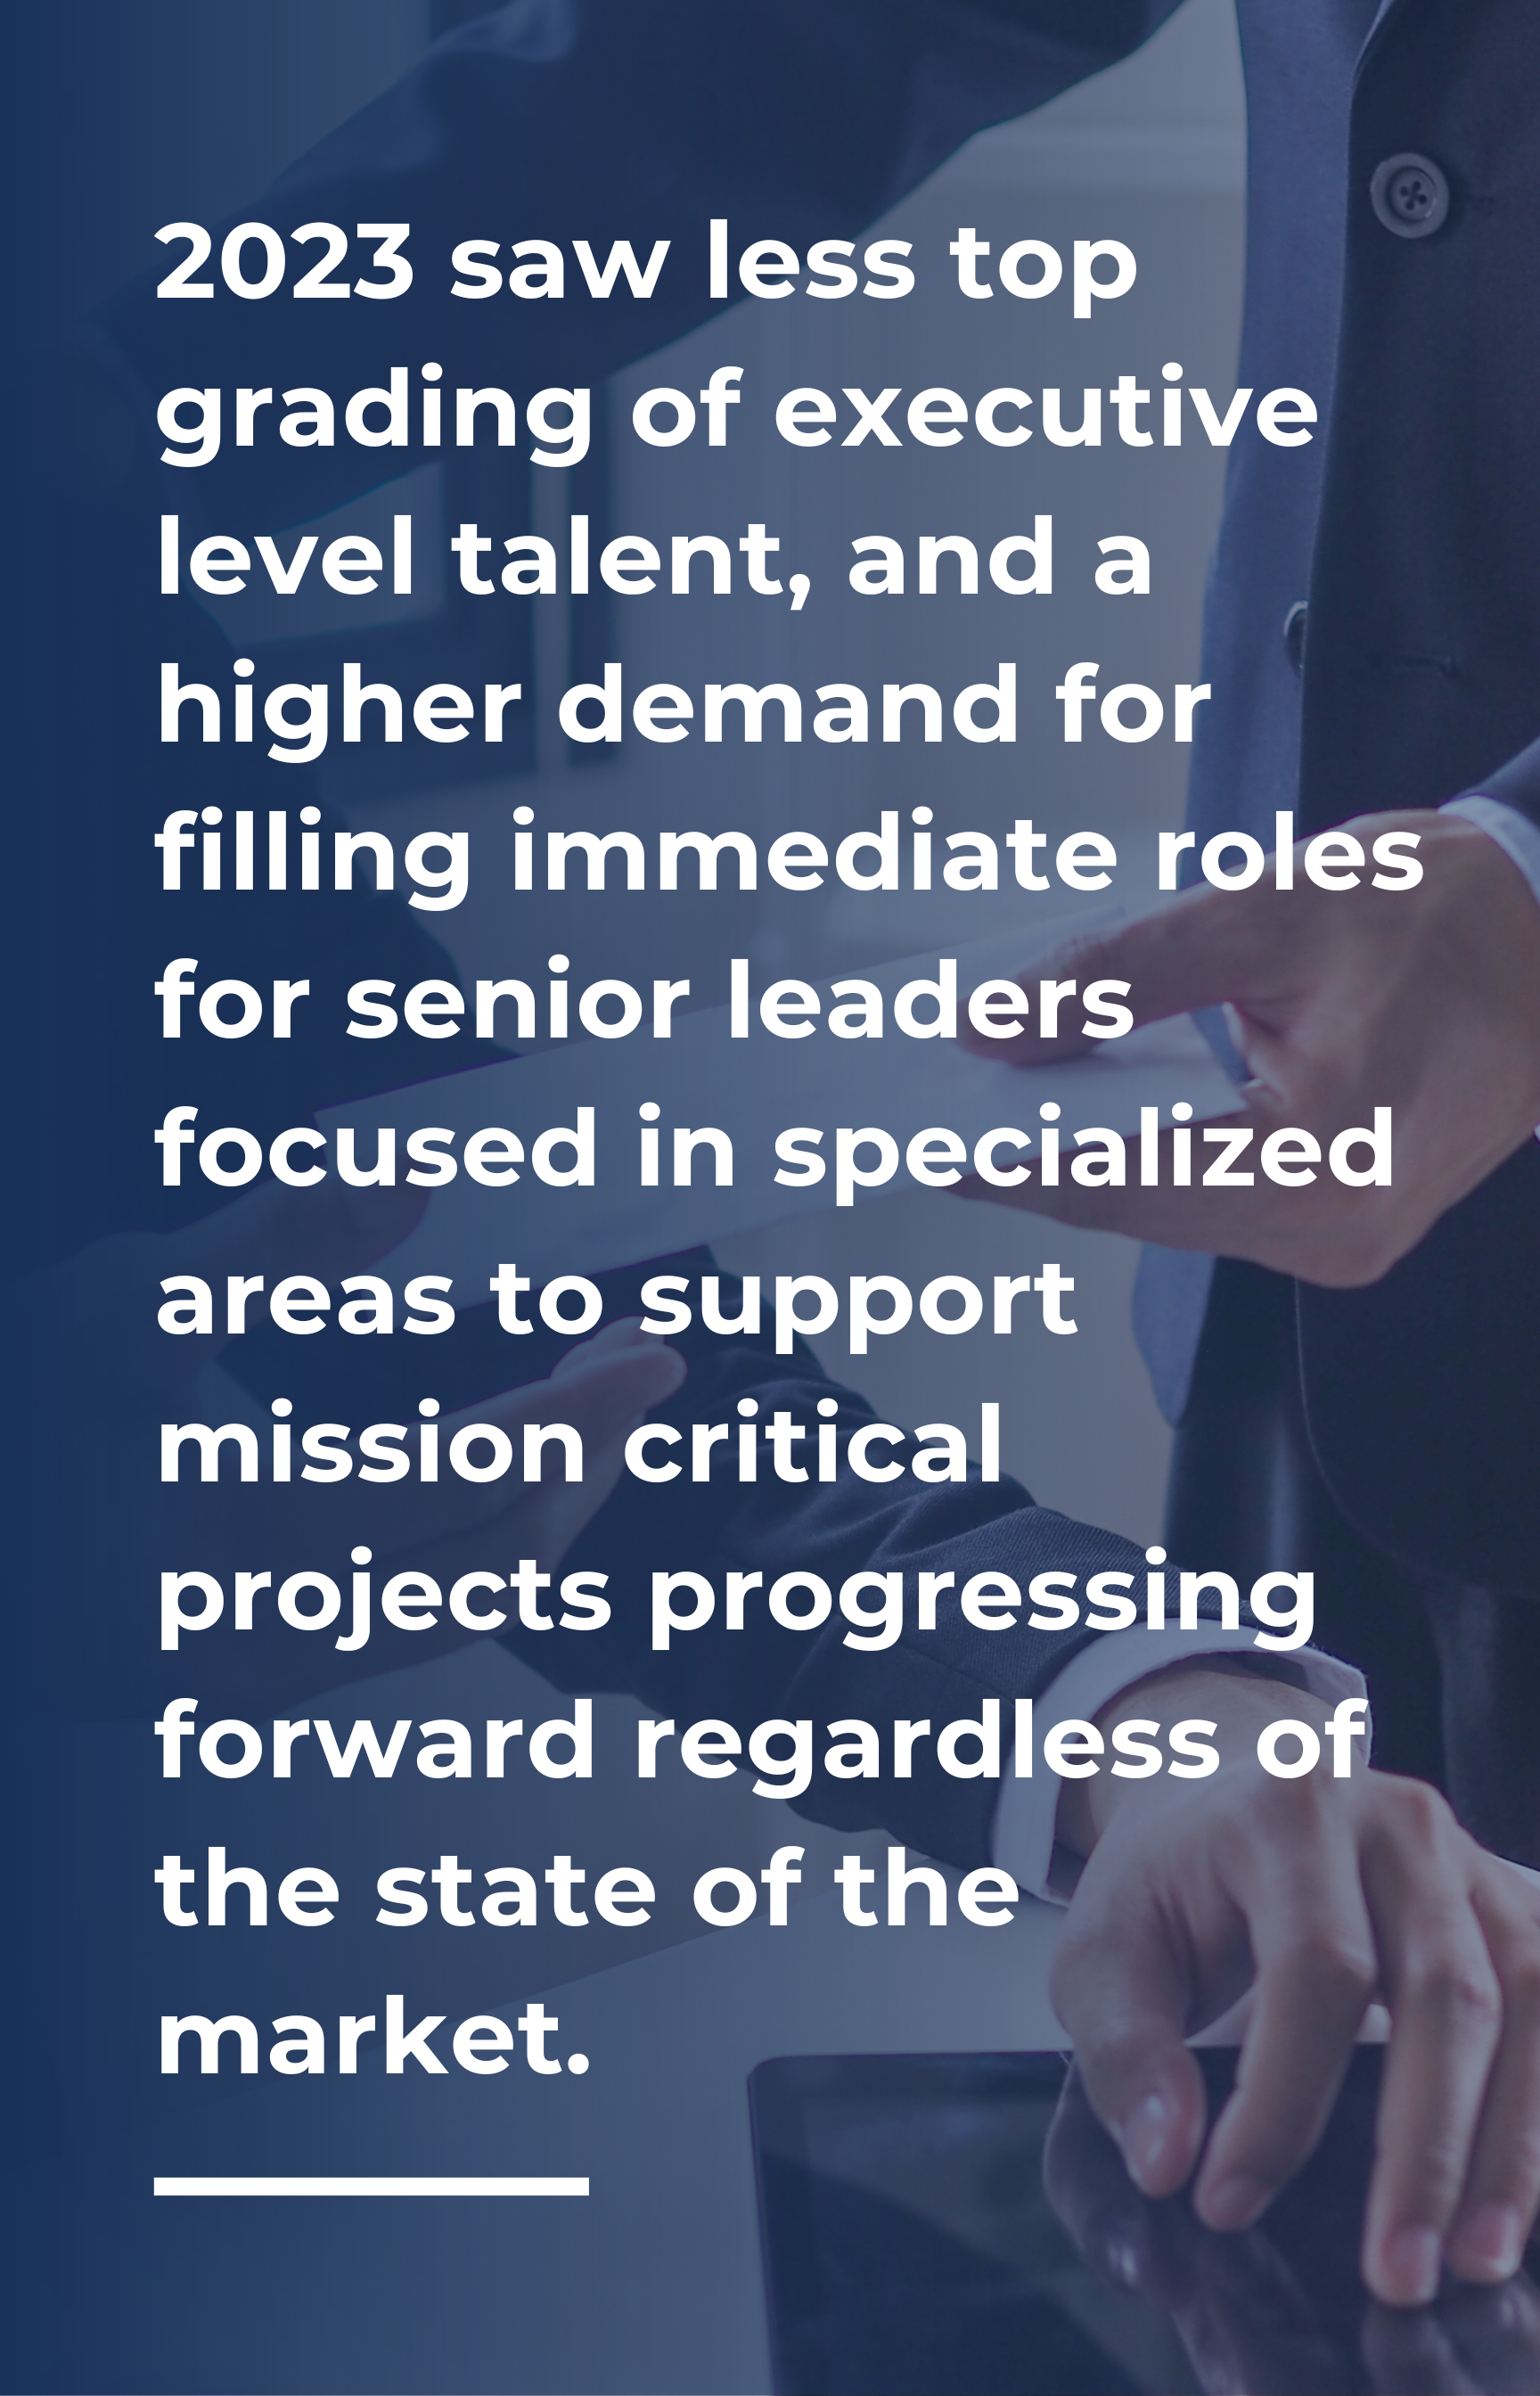 2023 saw less top grading of executive level talent, and a higher demand for filling immediate roles for senior leaders focused in specialized areas to support mission critical projects progressing forward regardless of the state of the market. 